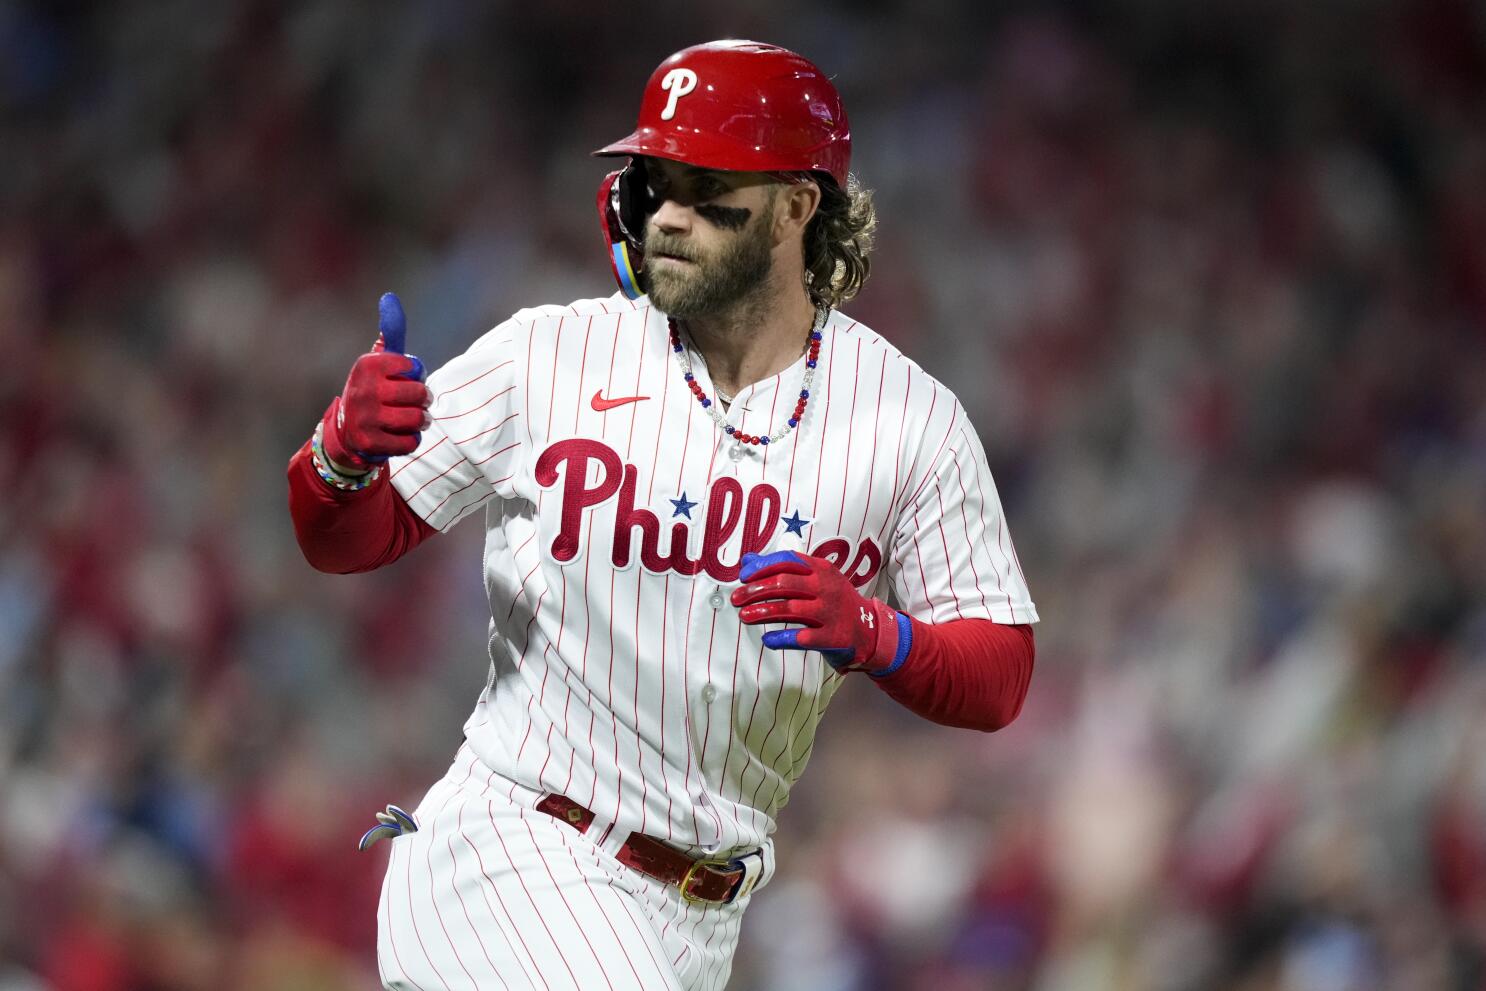 From 'The Process' to Bryce Harper: Inside Philadelphia's sudden